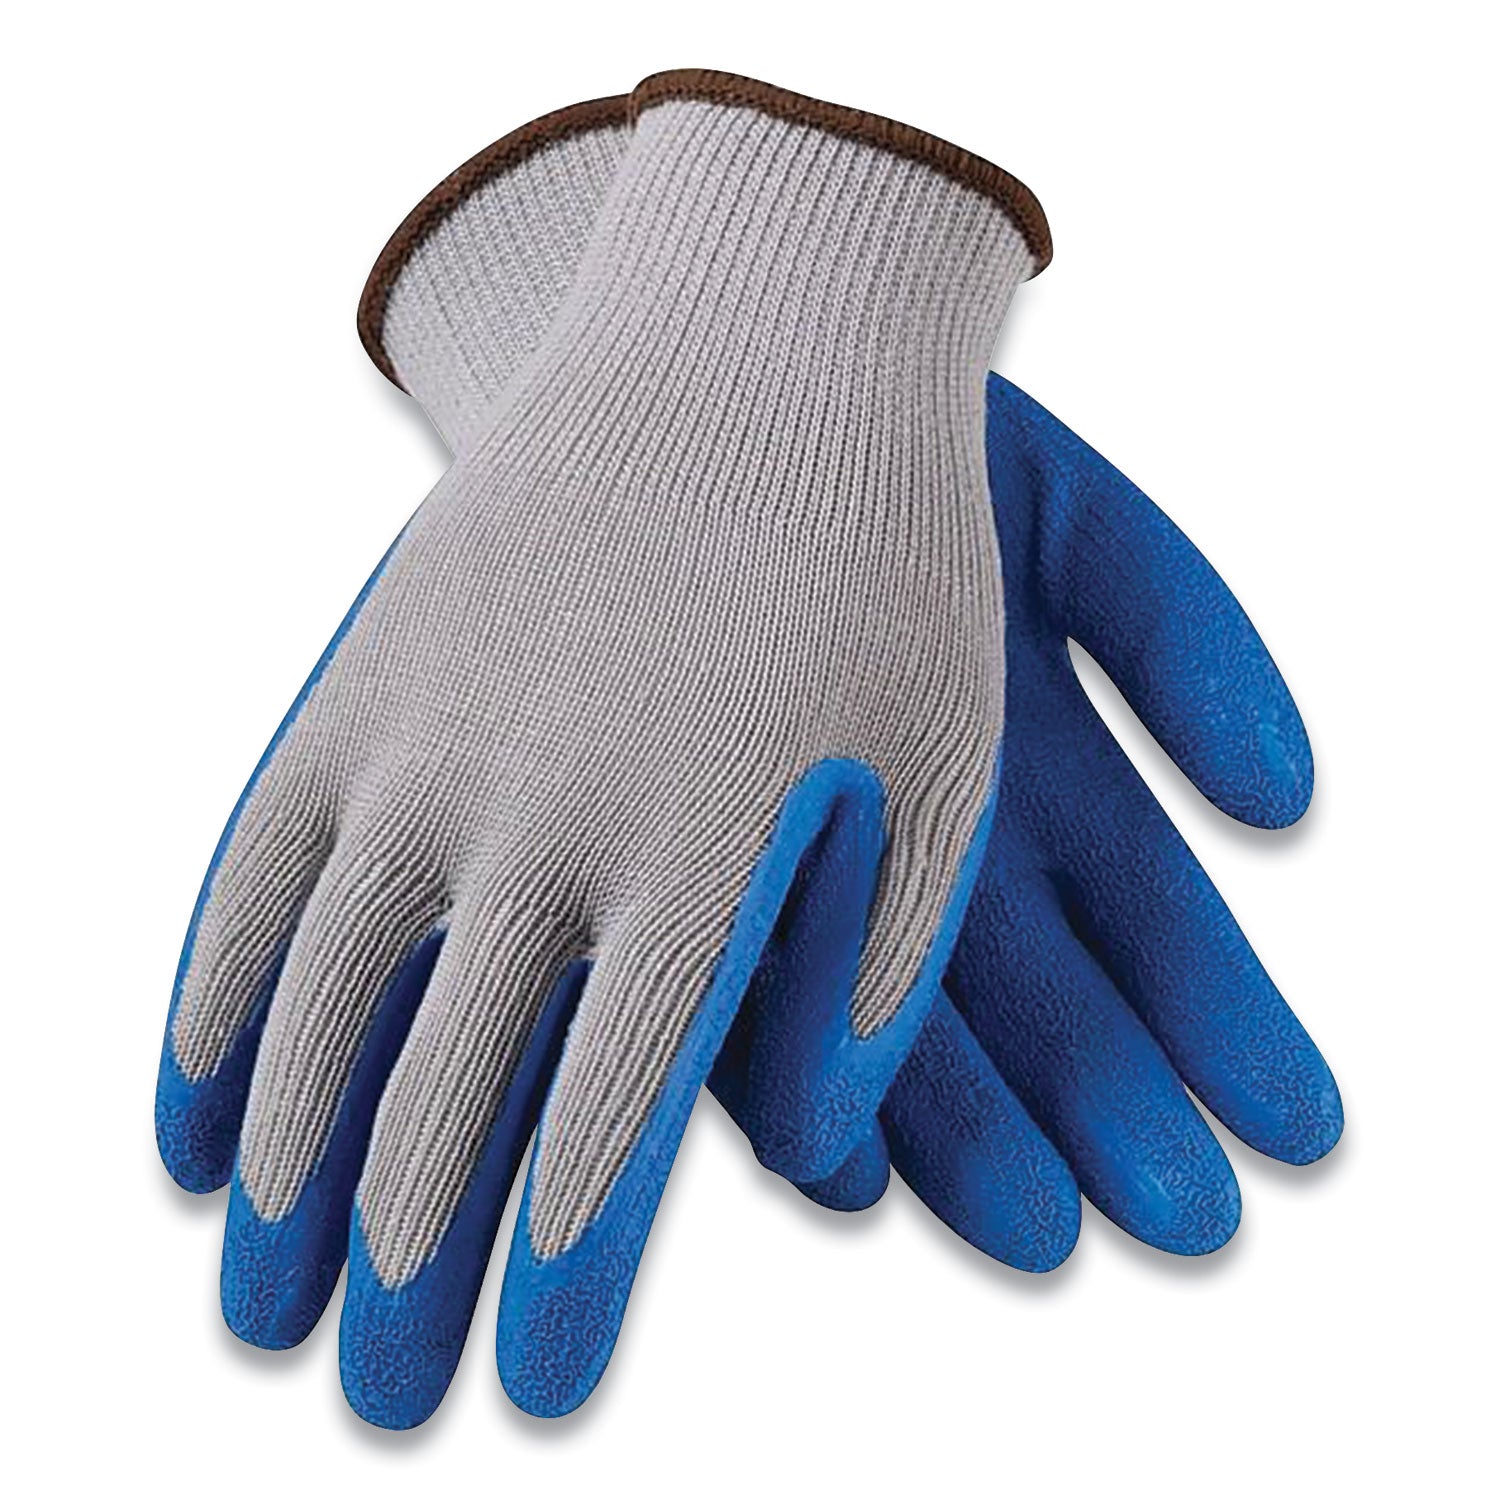 gp-latex-coated-cotton-polyester-gloves-medium-gray-blue-12-pairs_pid391310m - 1